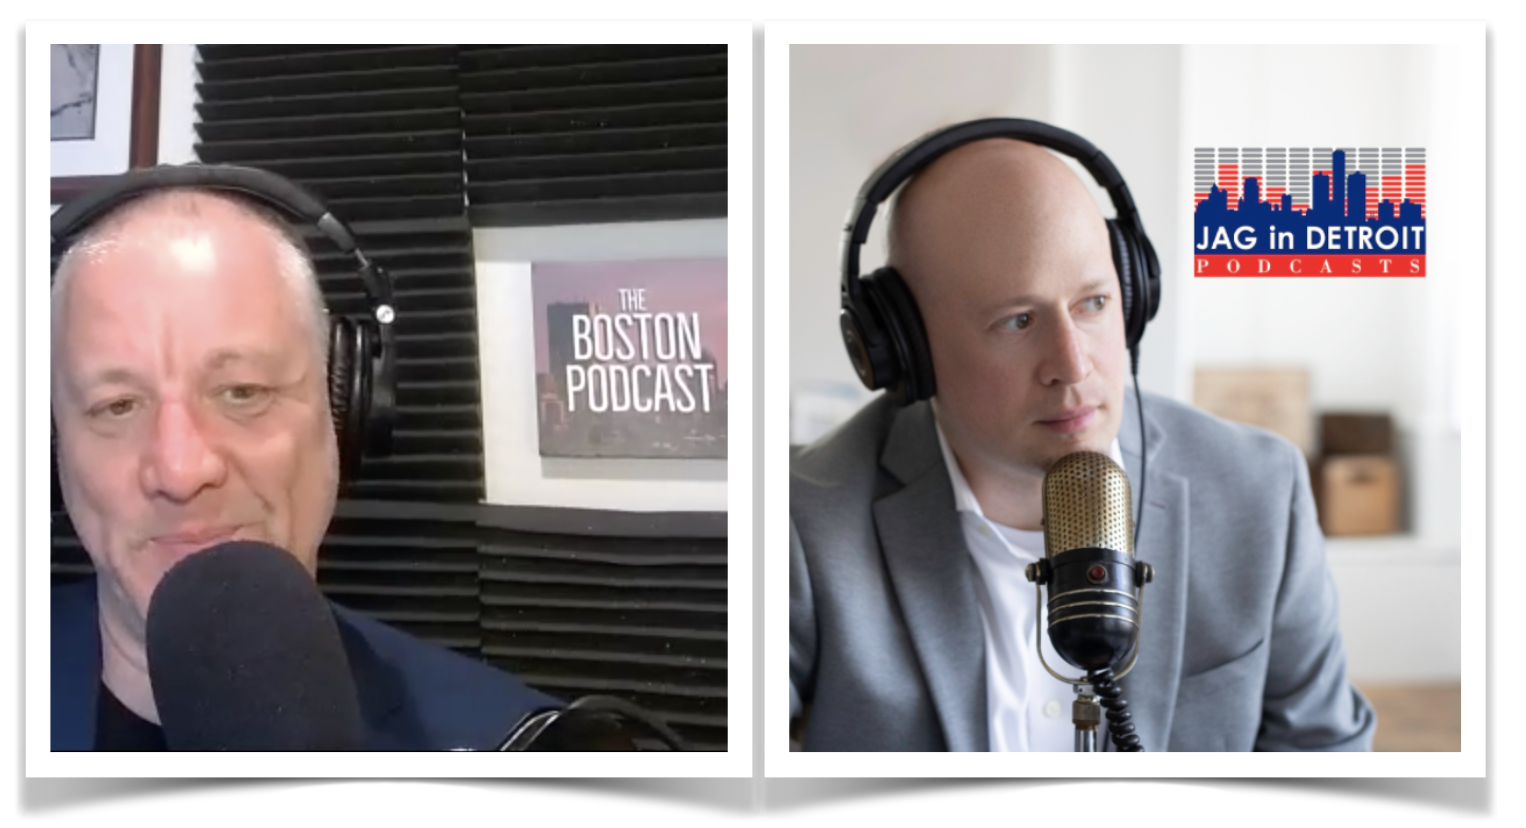 A Boston Boy is Detroit's Podcast King